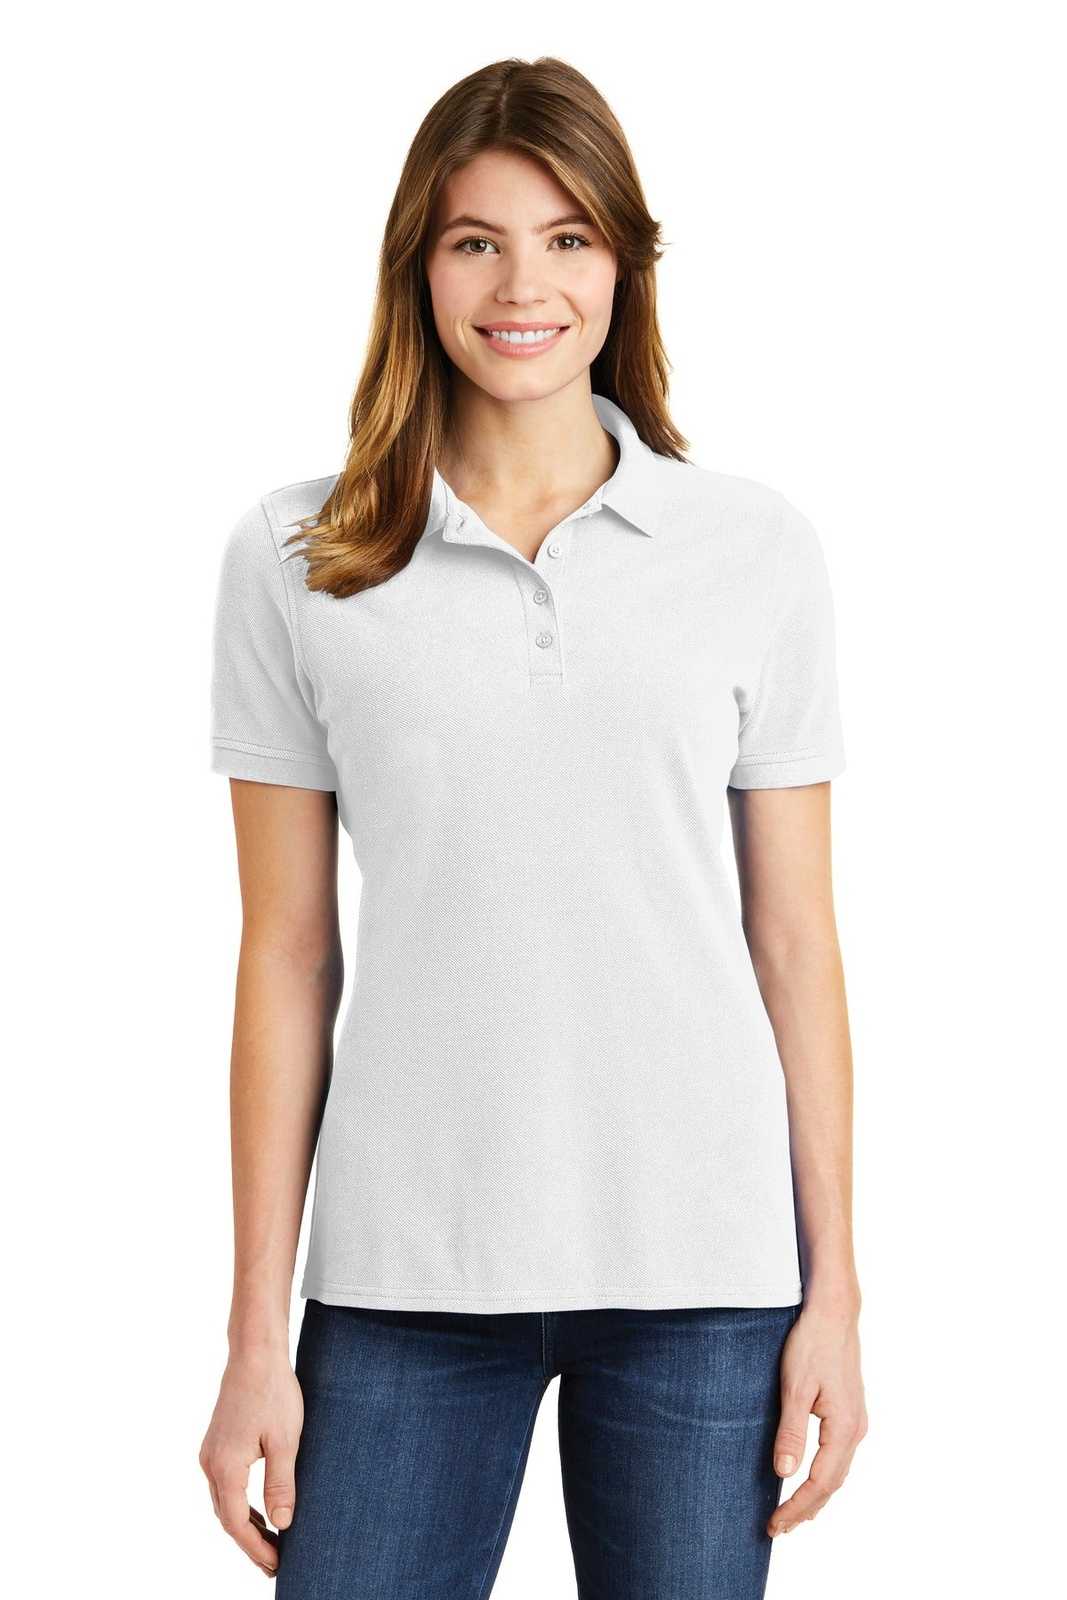 Port & Company LKP1500 Ladies Combed Ring Spun Pique Polo - White - HIT a Double - 1